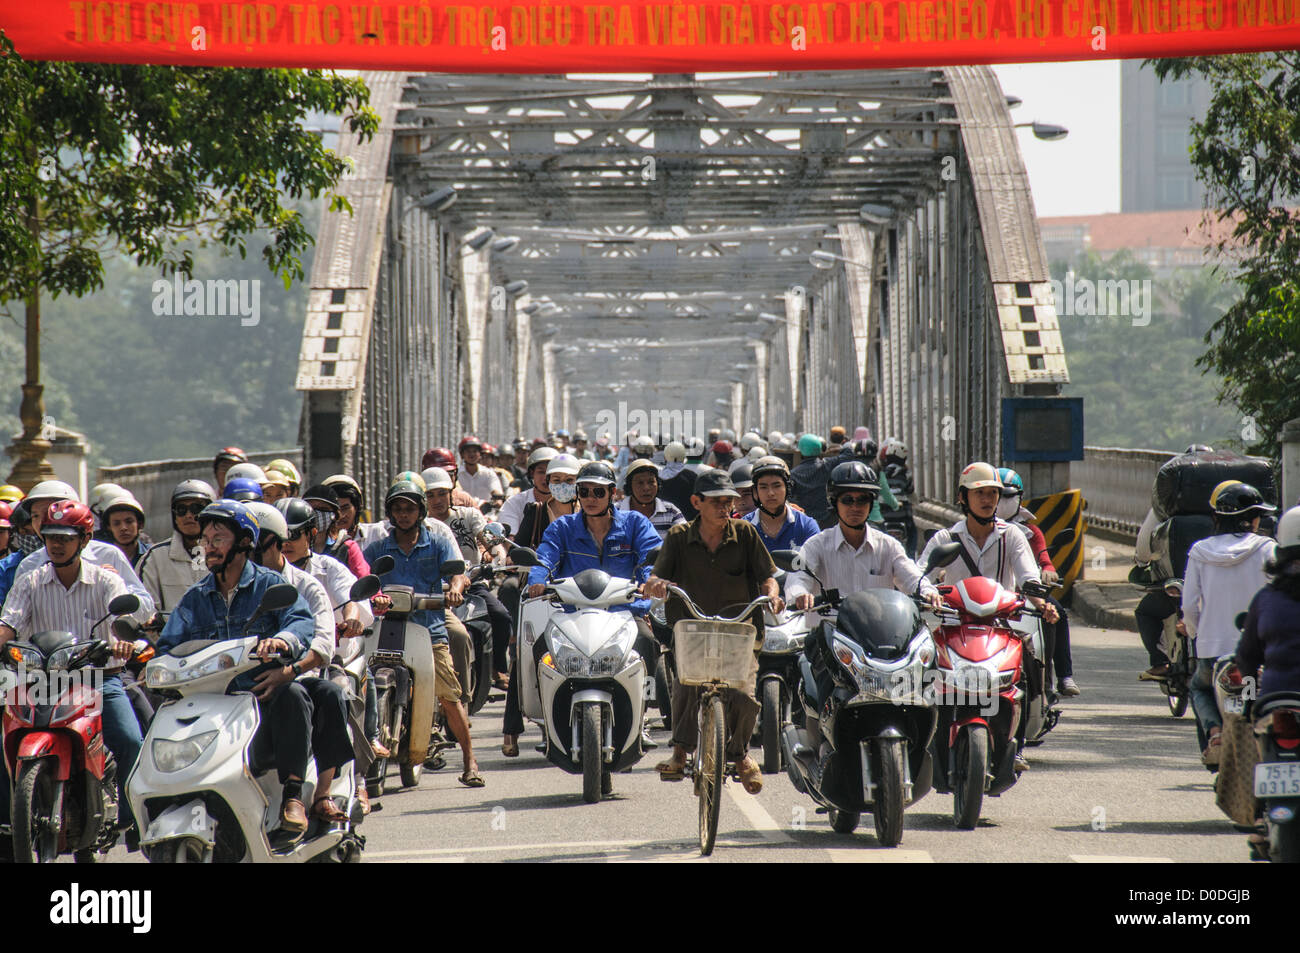 HUE, Vietnam - Hundreds of scooters and bikes crossing Cau Truong Tien in afternoon traffic in Hue, Vietnam. Stock Photo